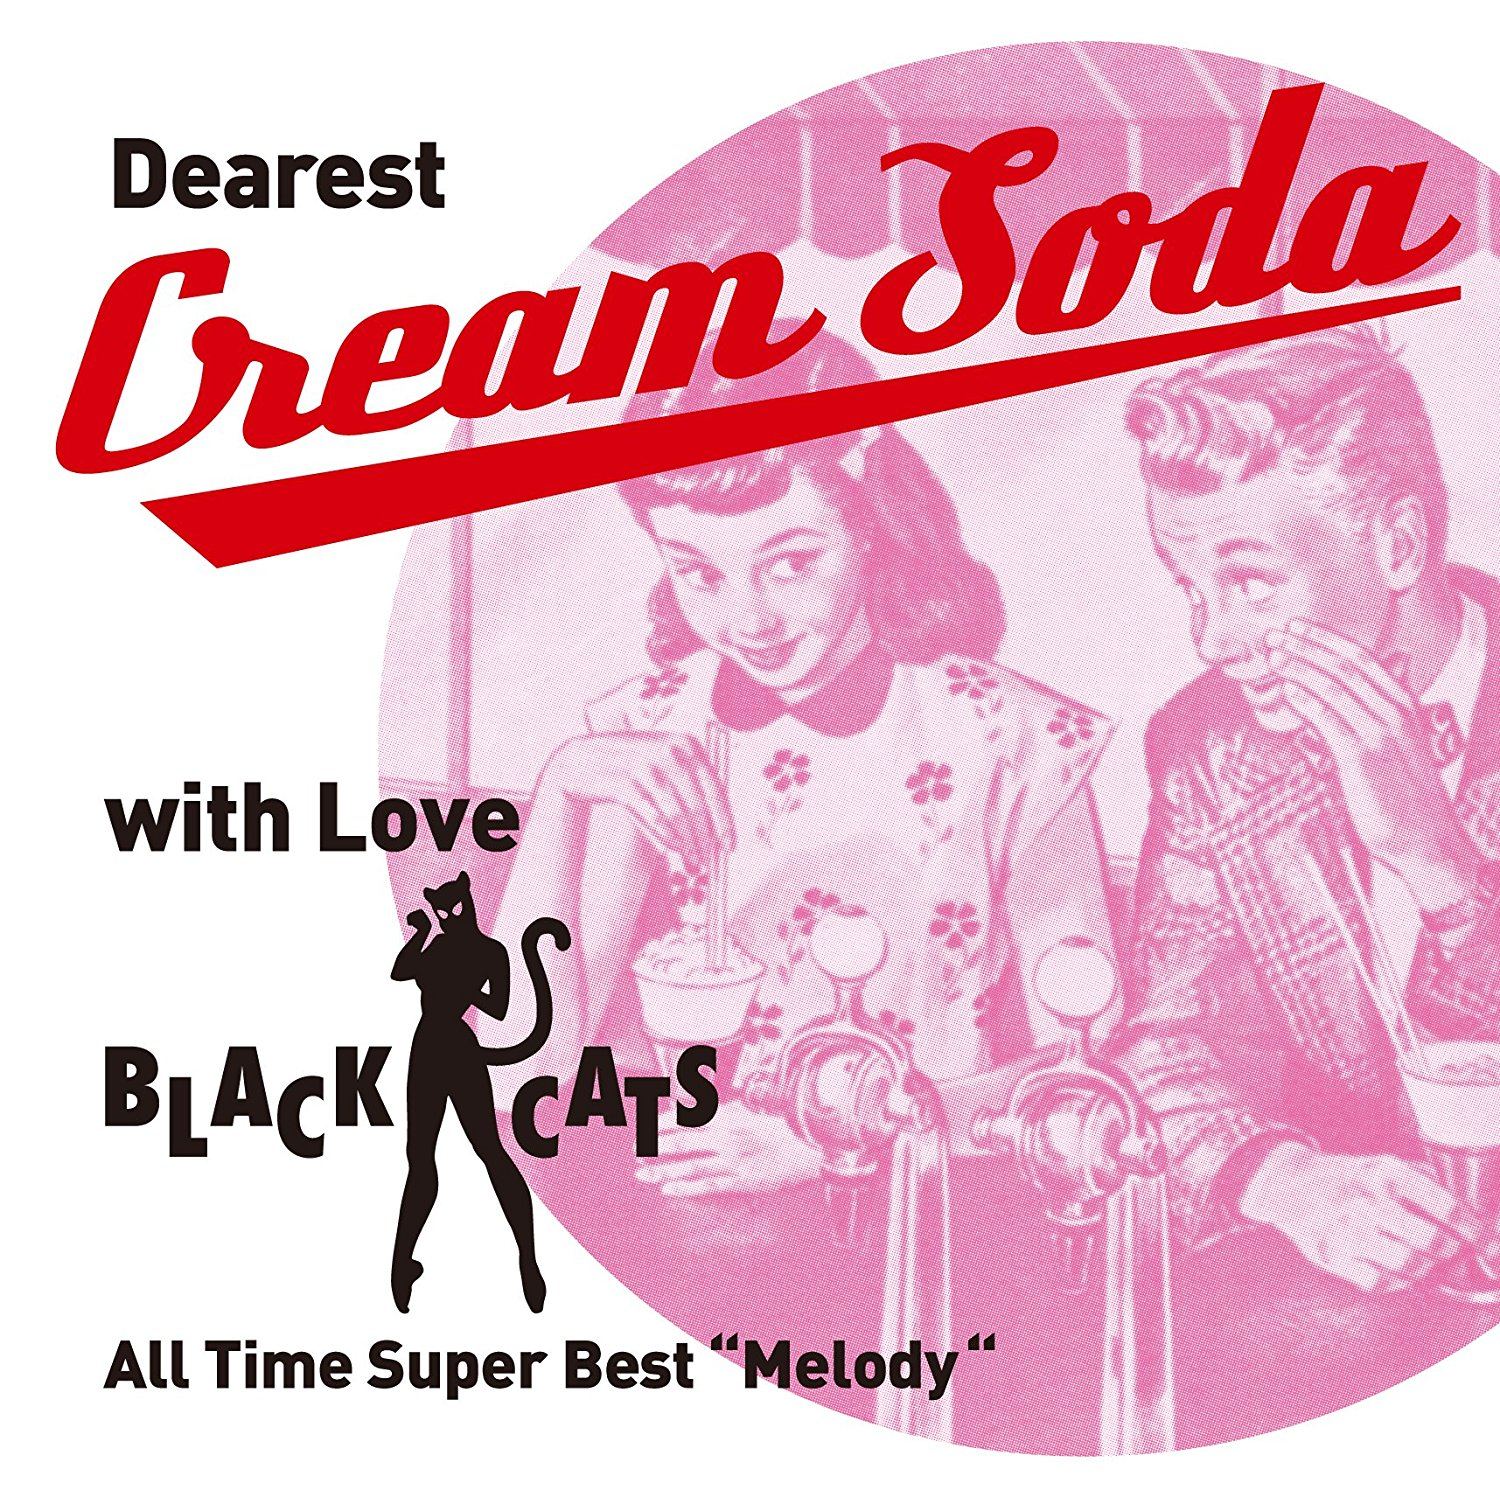 Dearest Cream Soda With Love Black Cats - All Time Super Best [Melody]